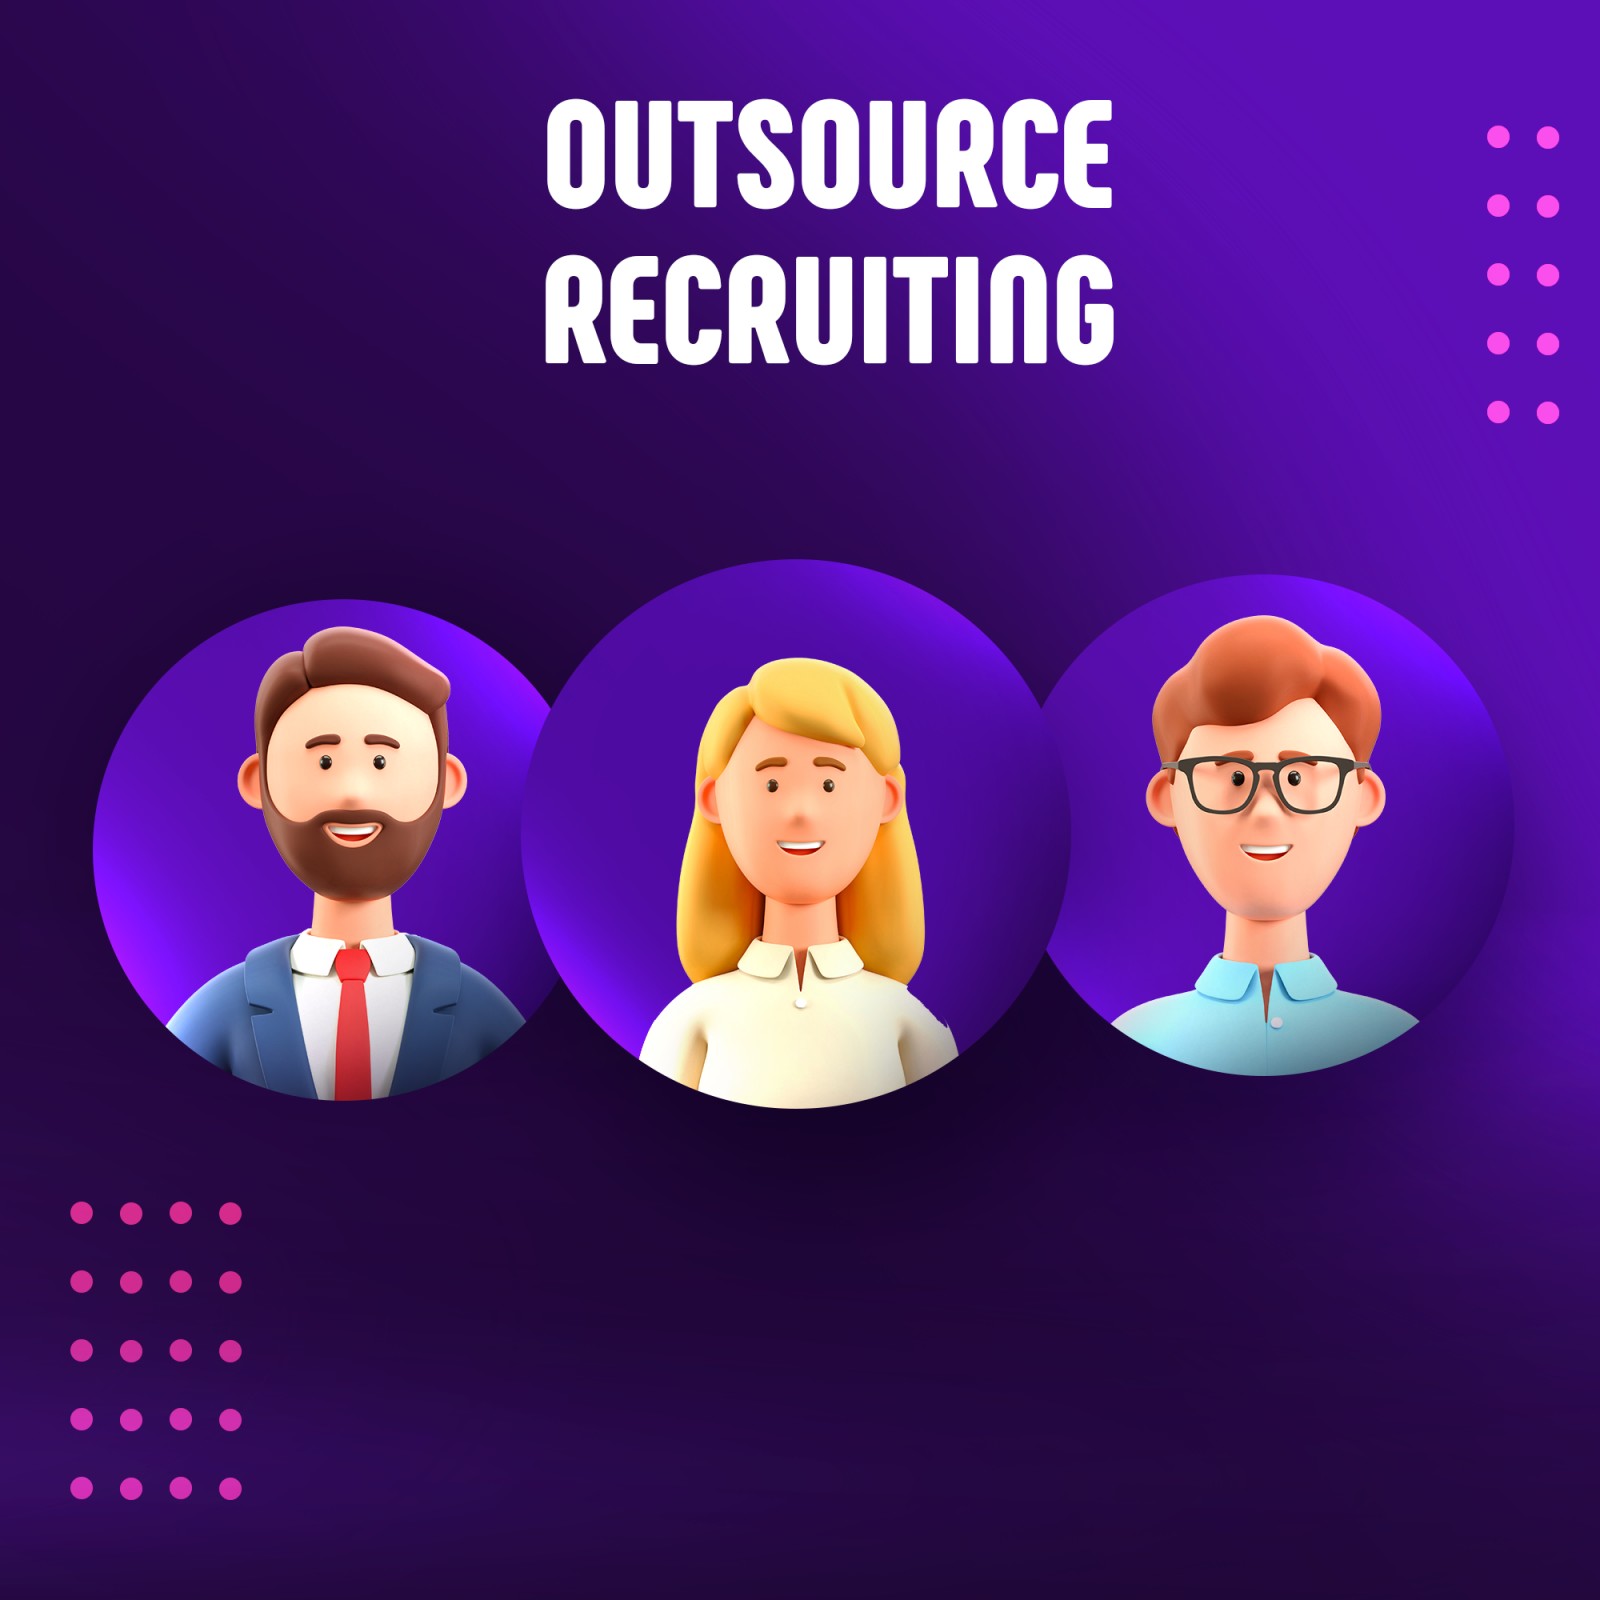 Outsource recruiting, staff augmentation, outsource sales